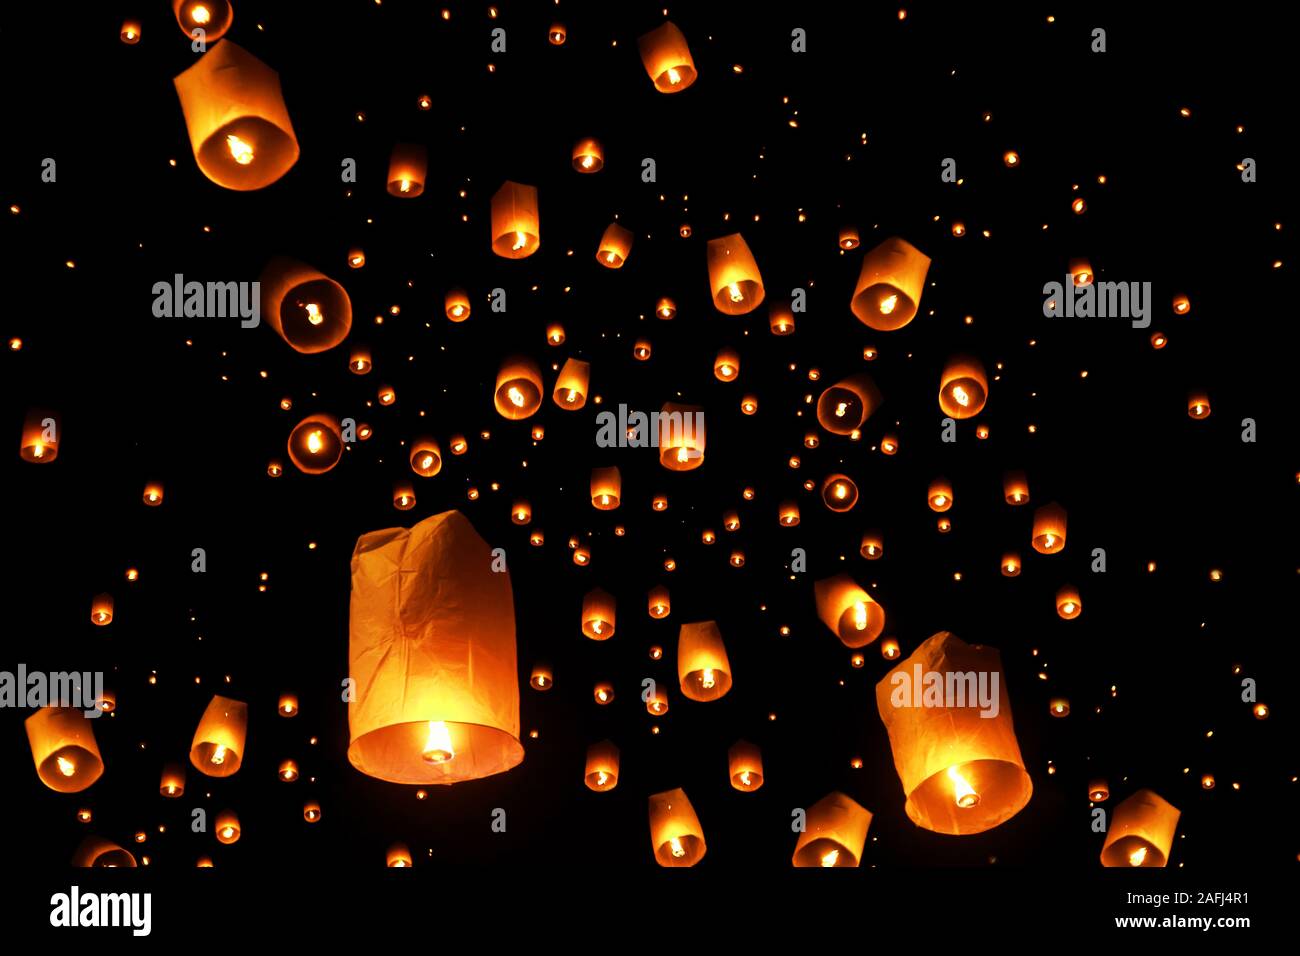 swarms of sky floating lanterns are launched into the air during New year's eve and Yee Peng lantern festival traditional at Chiang Mai , Thailand. Stock Photo